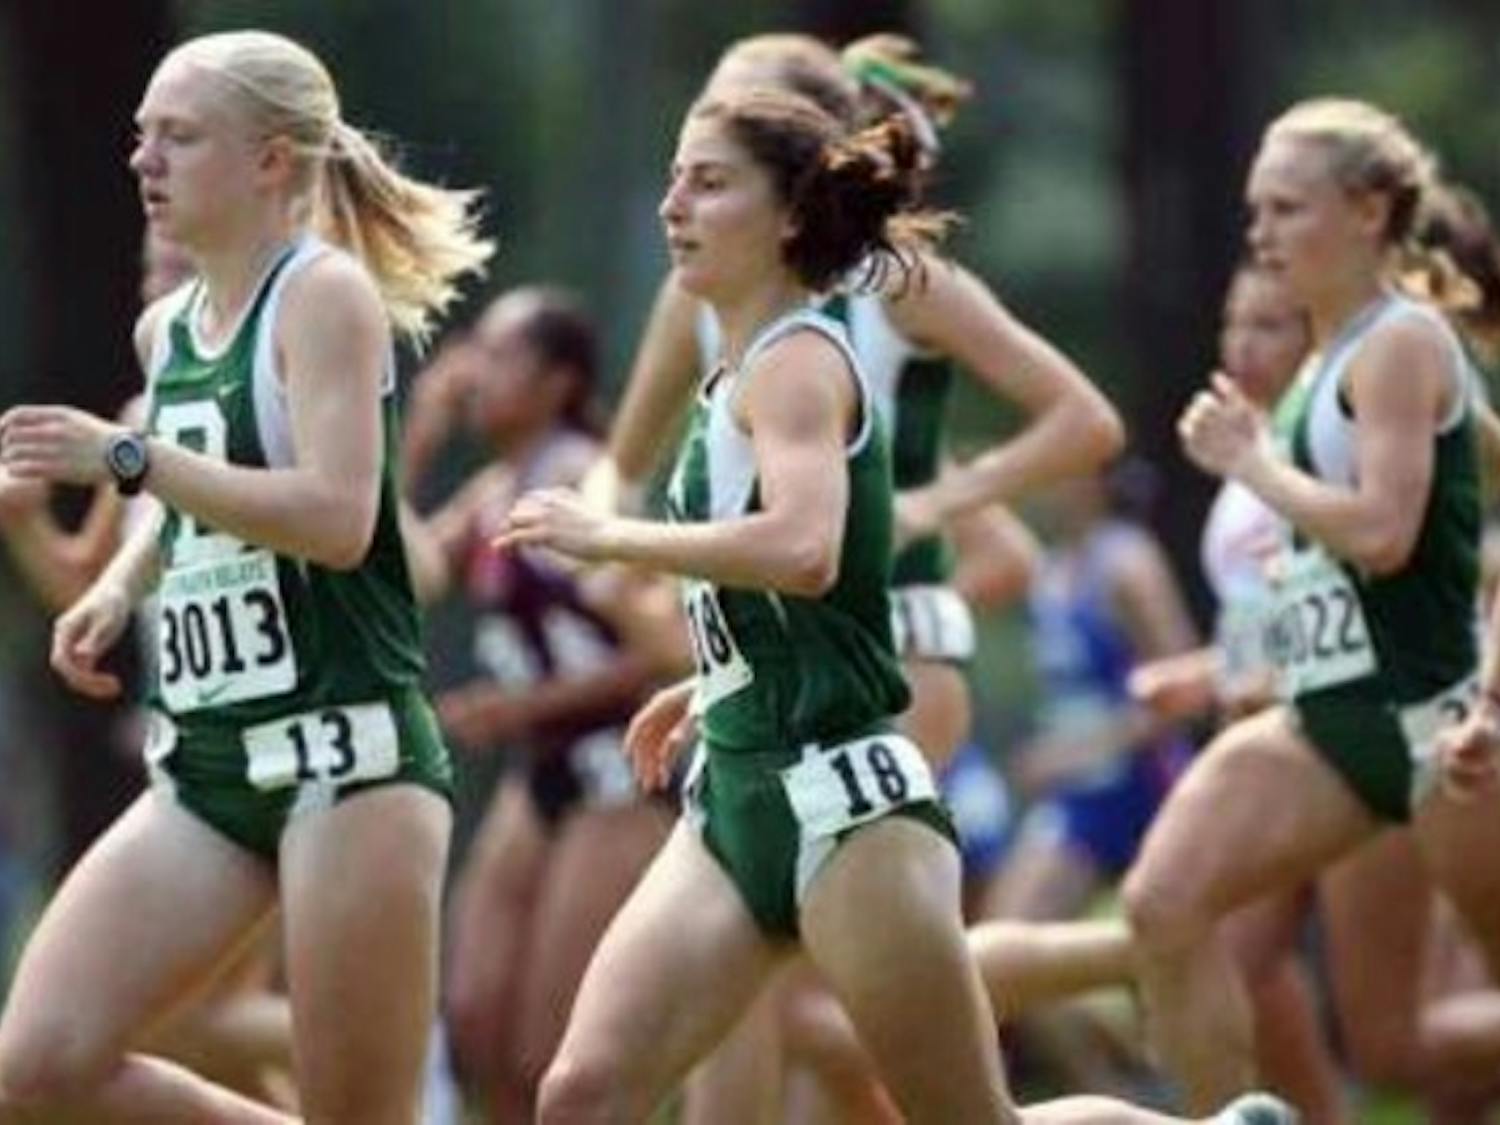 The cross country squads will face off against Ivy competition this weekend.